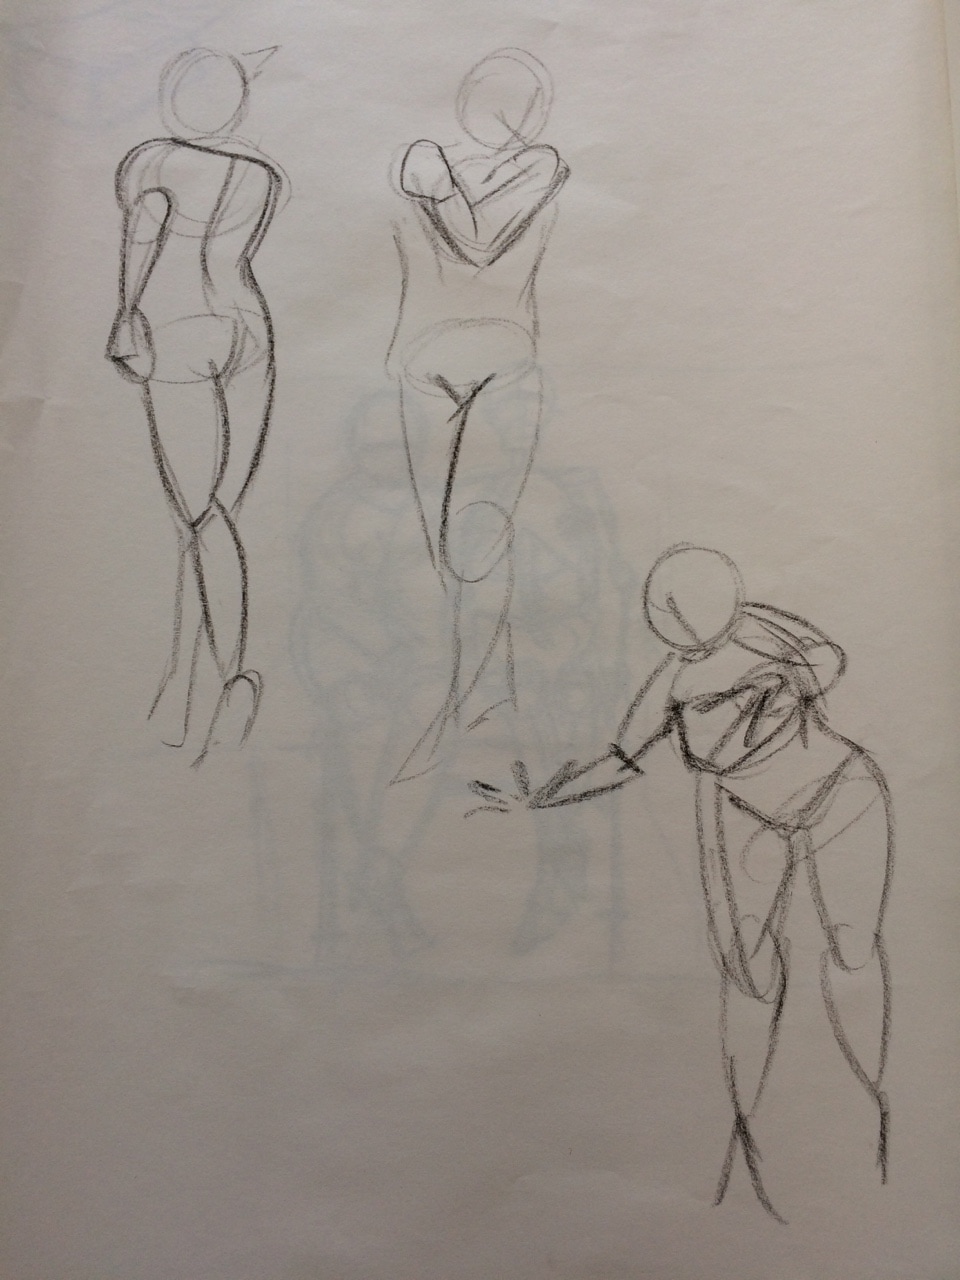 Life Drawing  Line of Action 